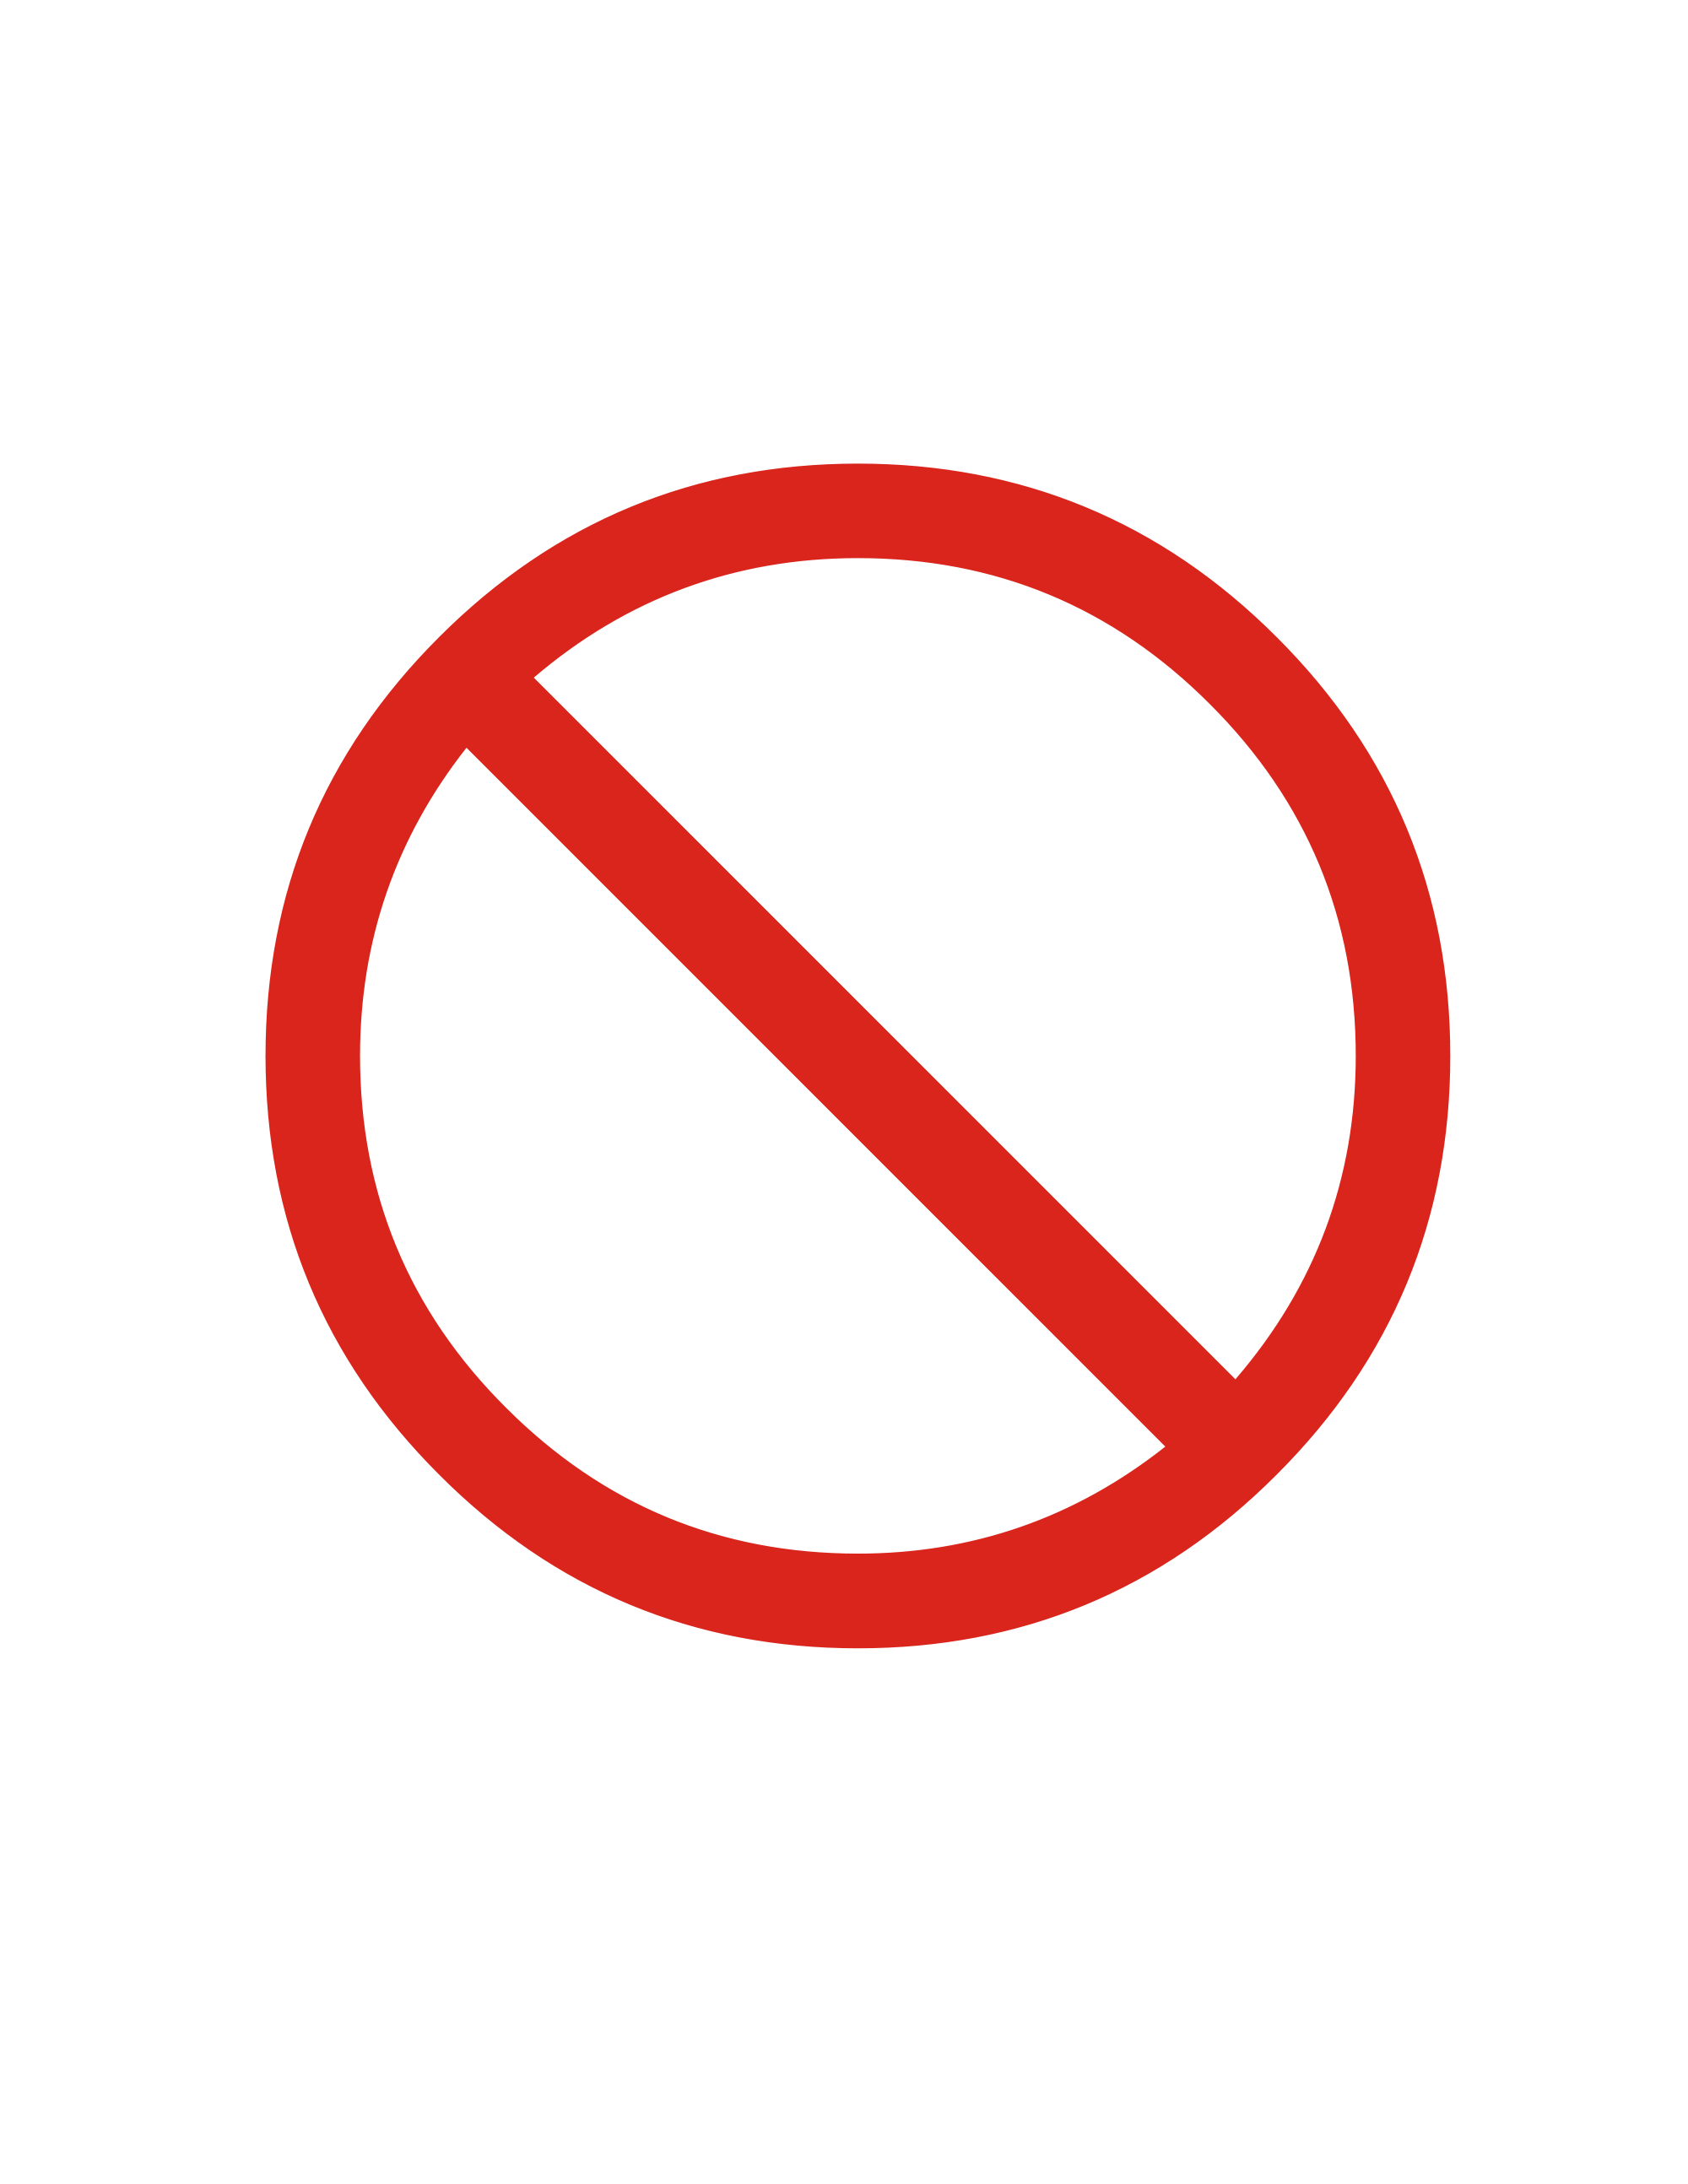 Free Prohibited Sign Transparent, Download Free Prohibited Sign ...